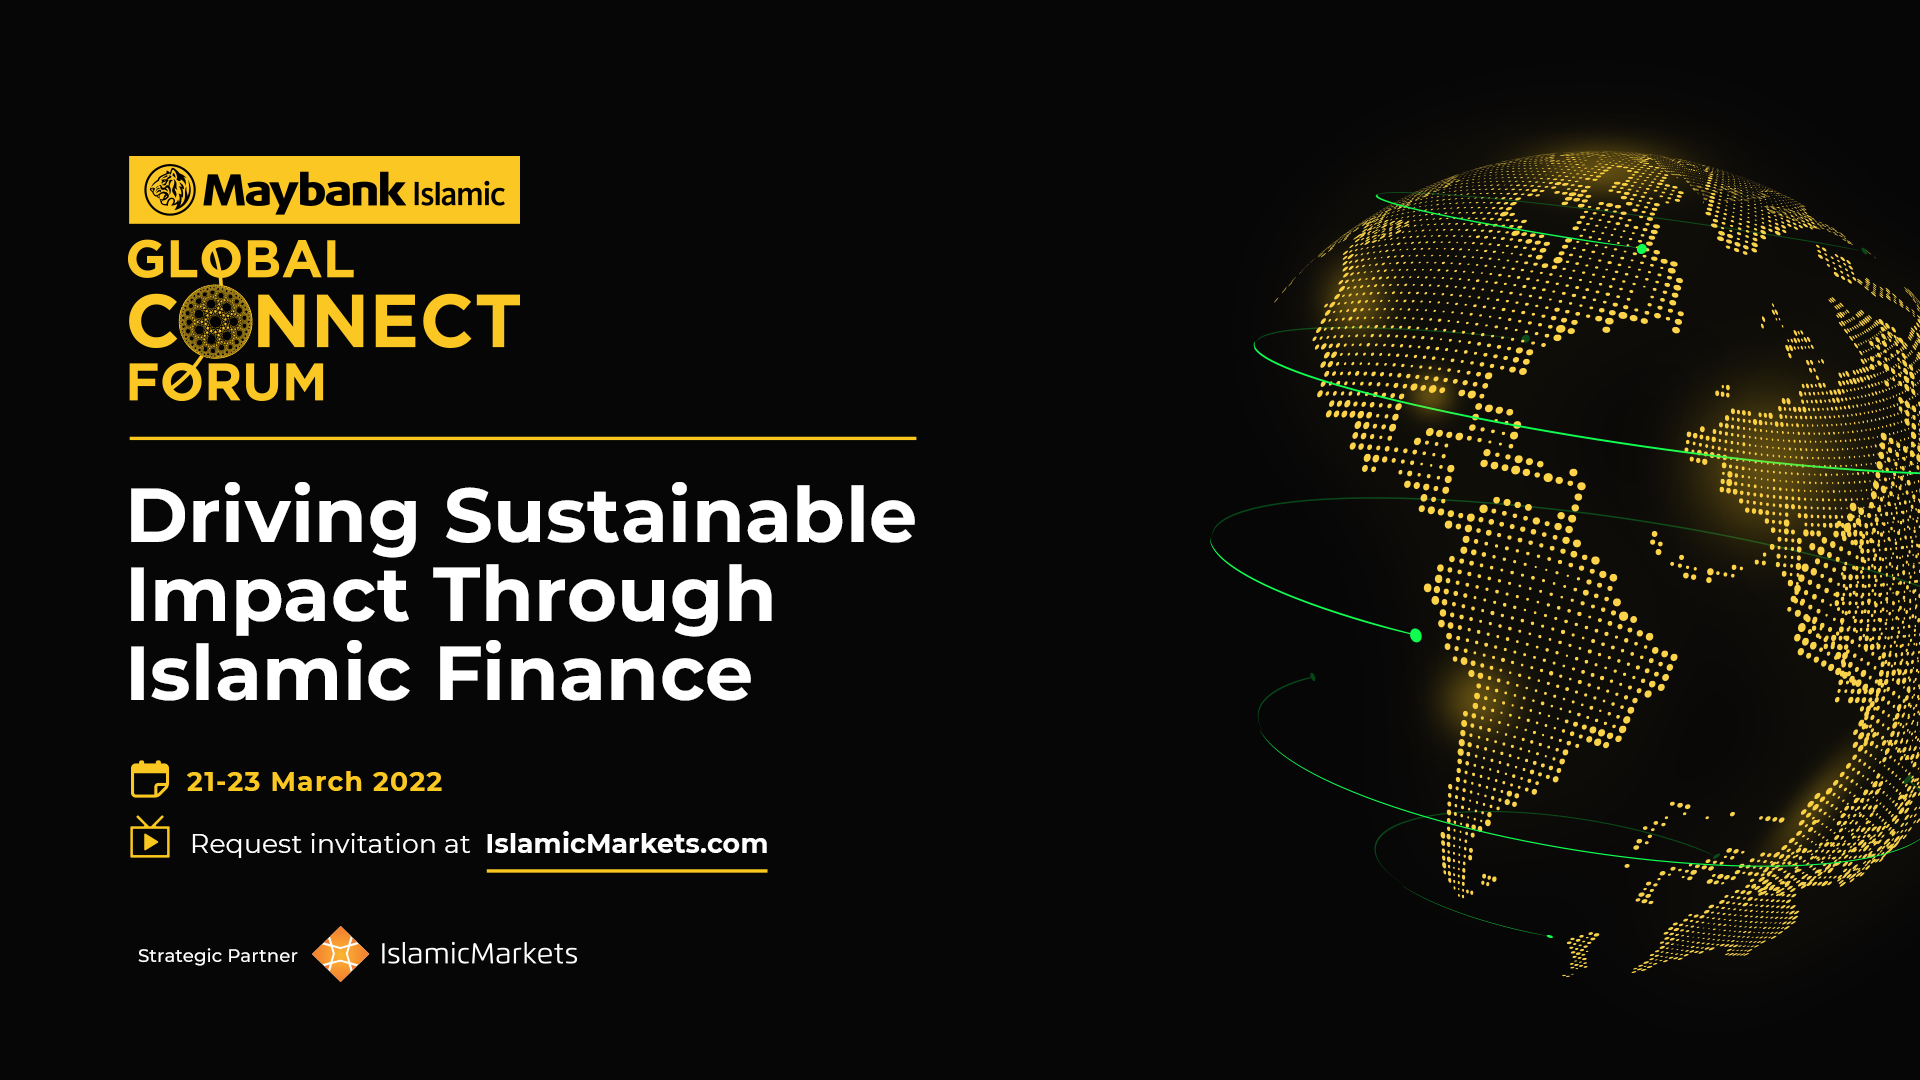 Maybank Islamic Launches Global Connect Forum To Drive The Convergence Between Sustainability, Islamic Finance And The Halal Economy 